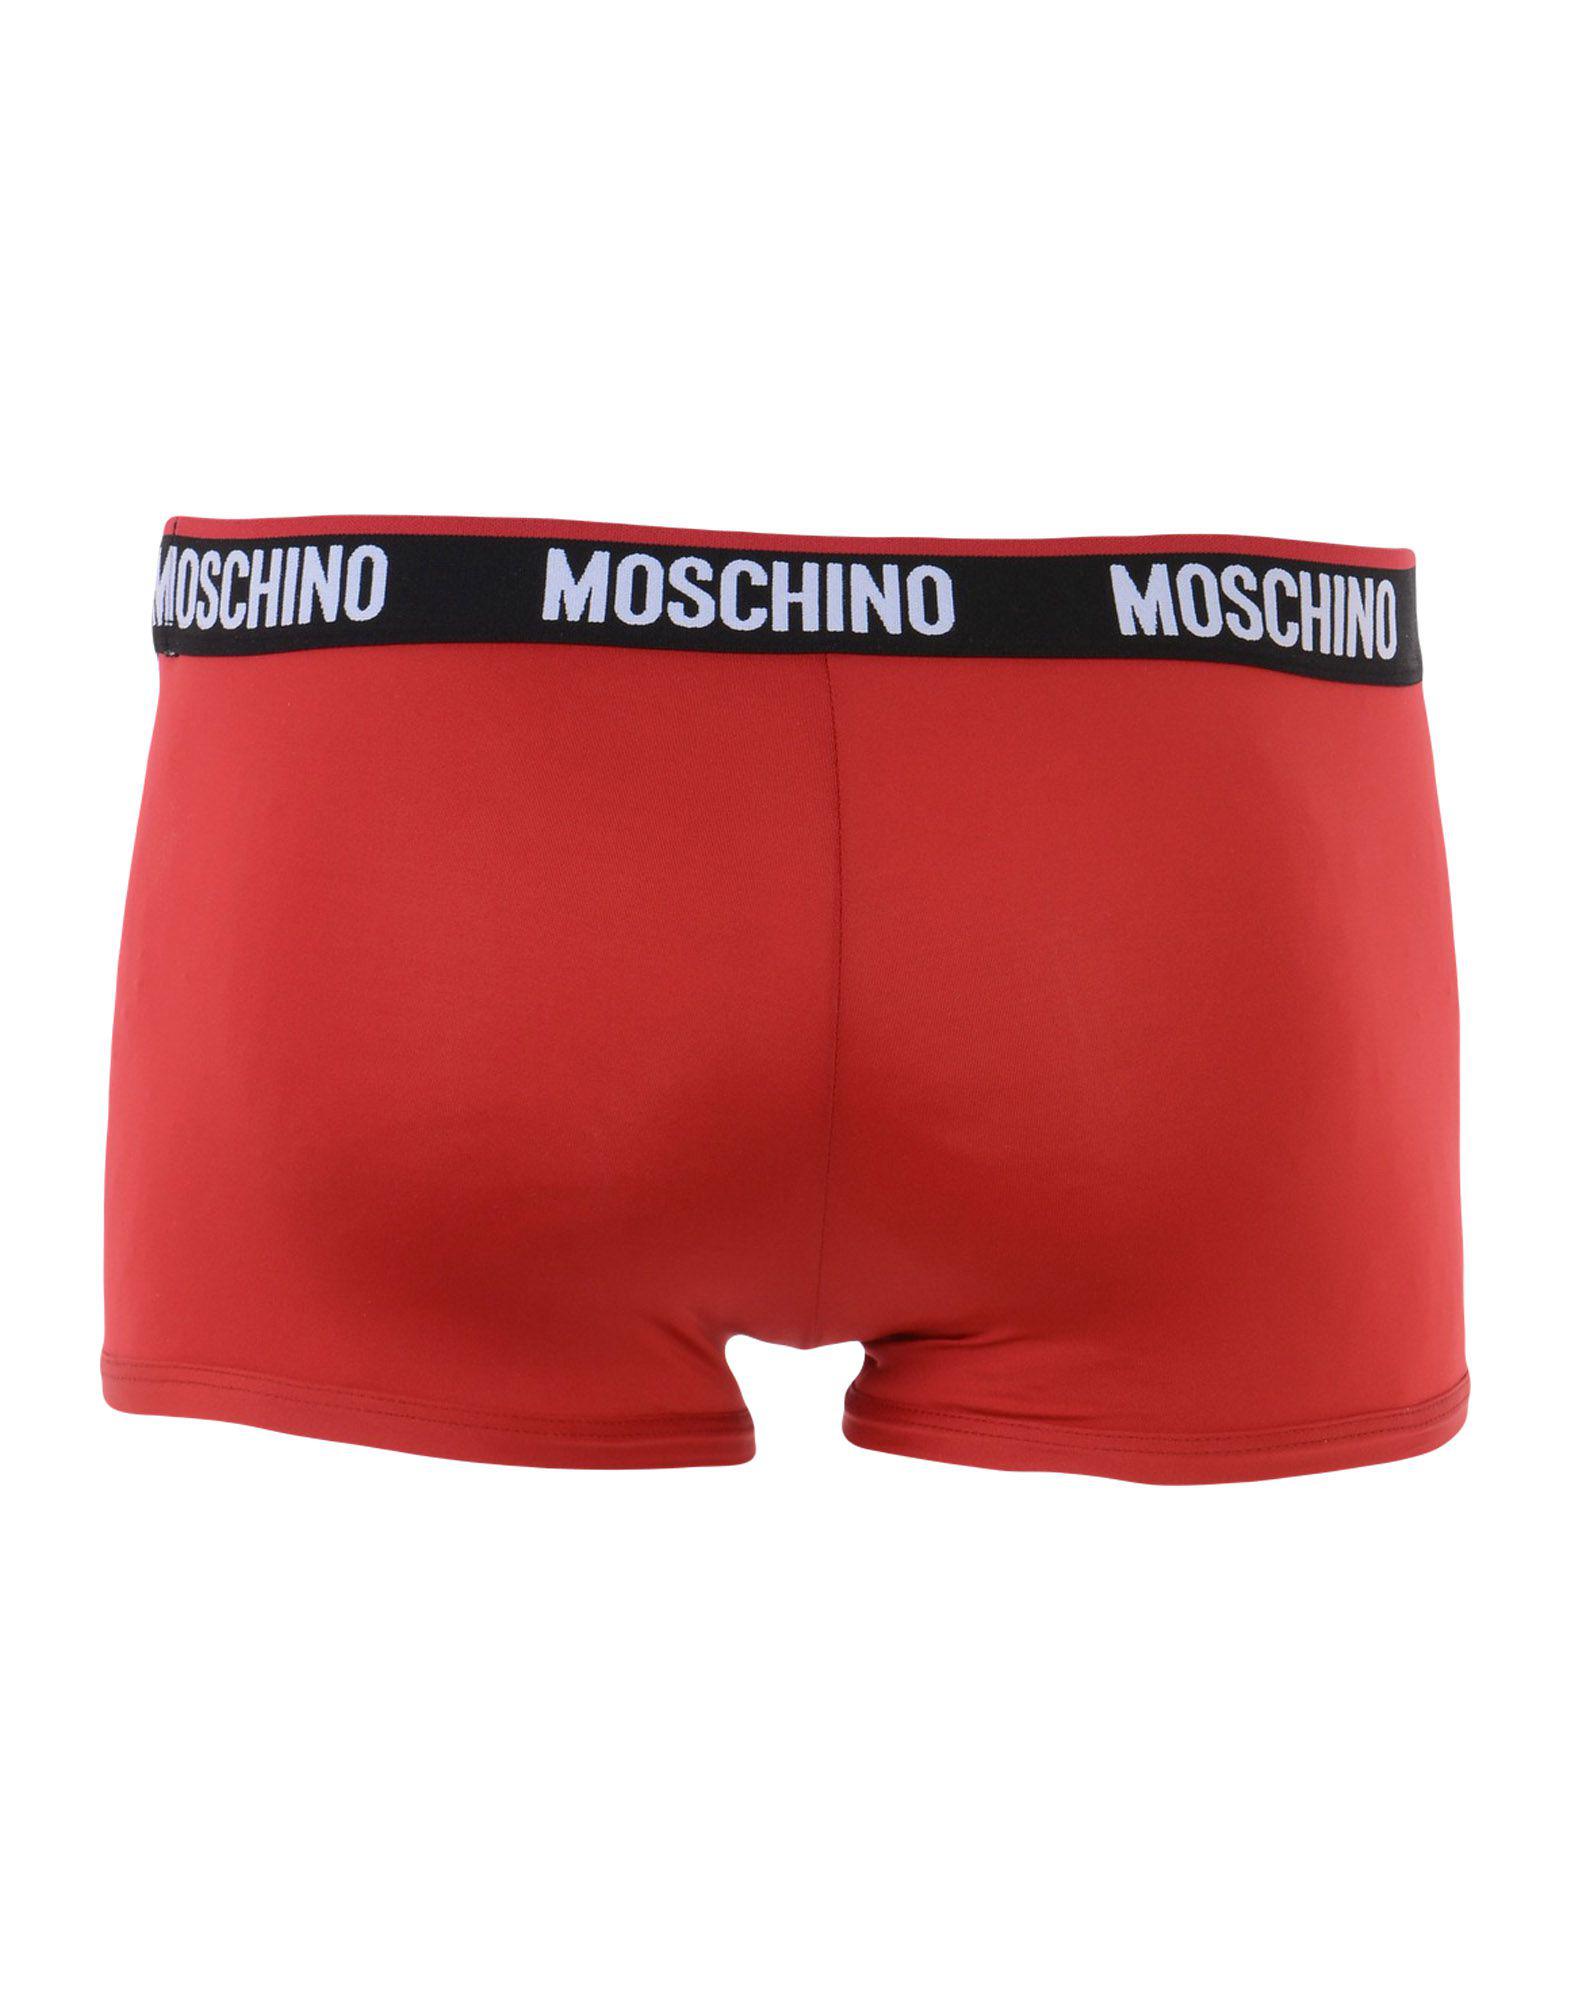 Moschino Synthetic Boxer in Red for Men - Lyst